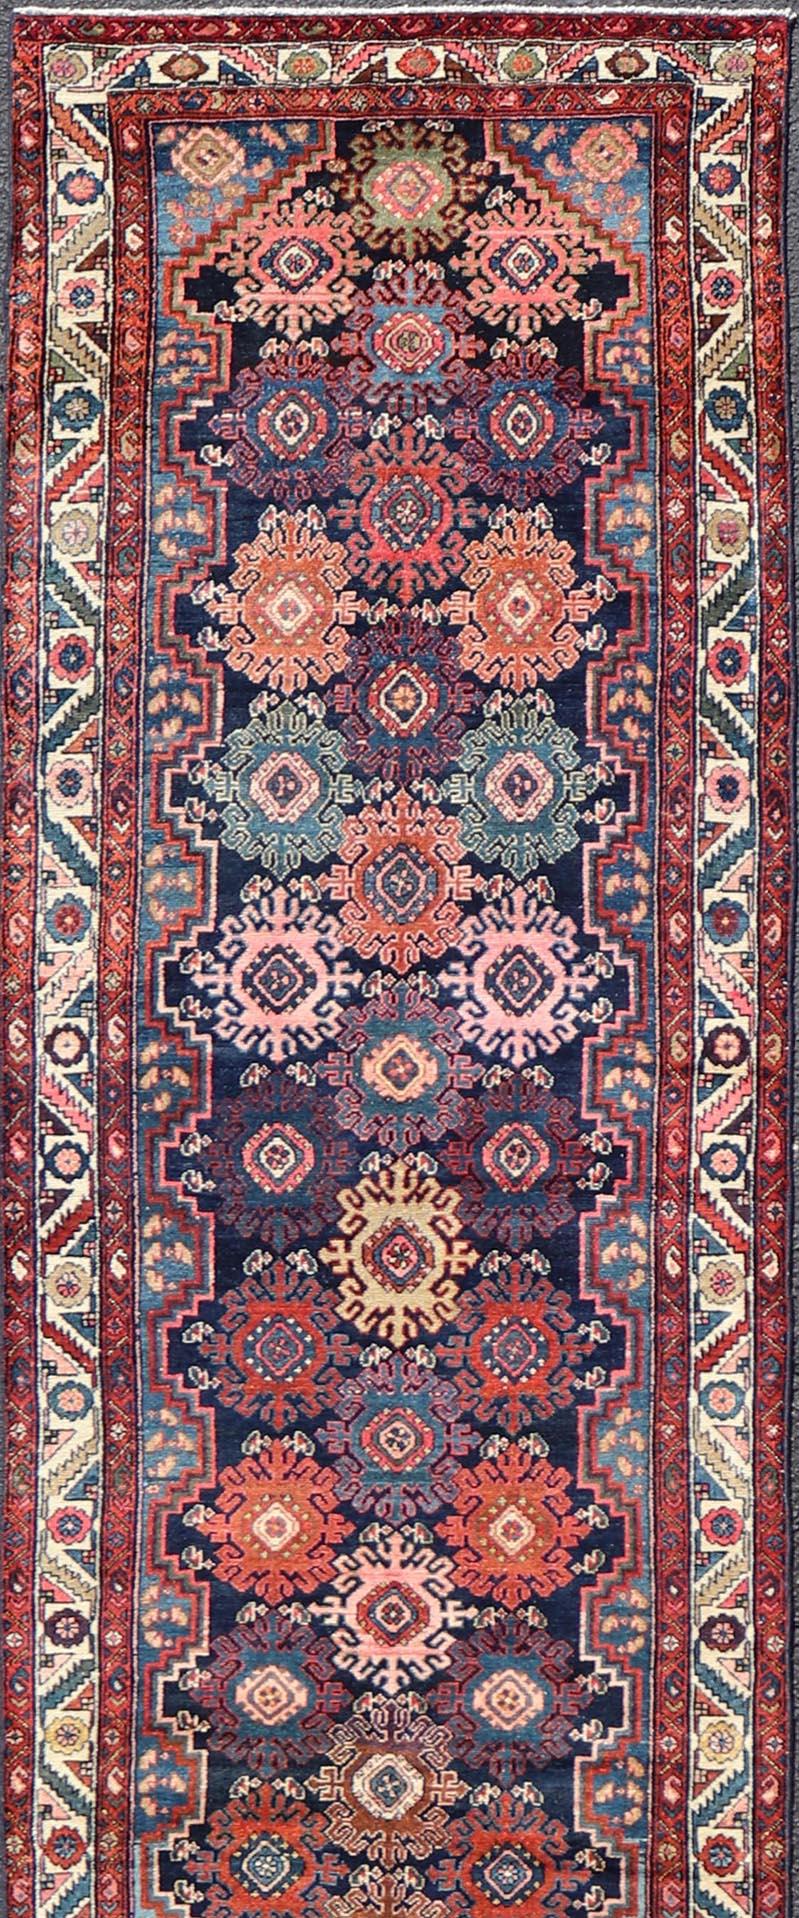 Wool Antique Persian Hamadan Runner with All-Over Geometric Motifs In Jewel Tones For Sale